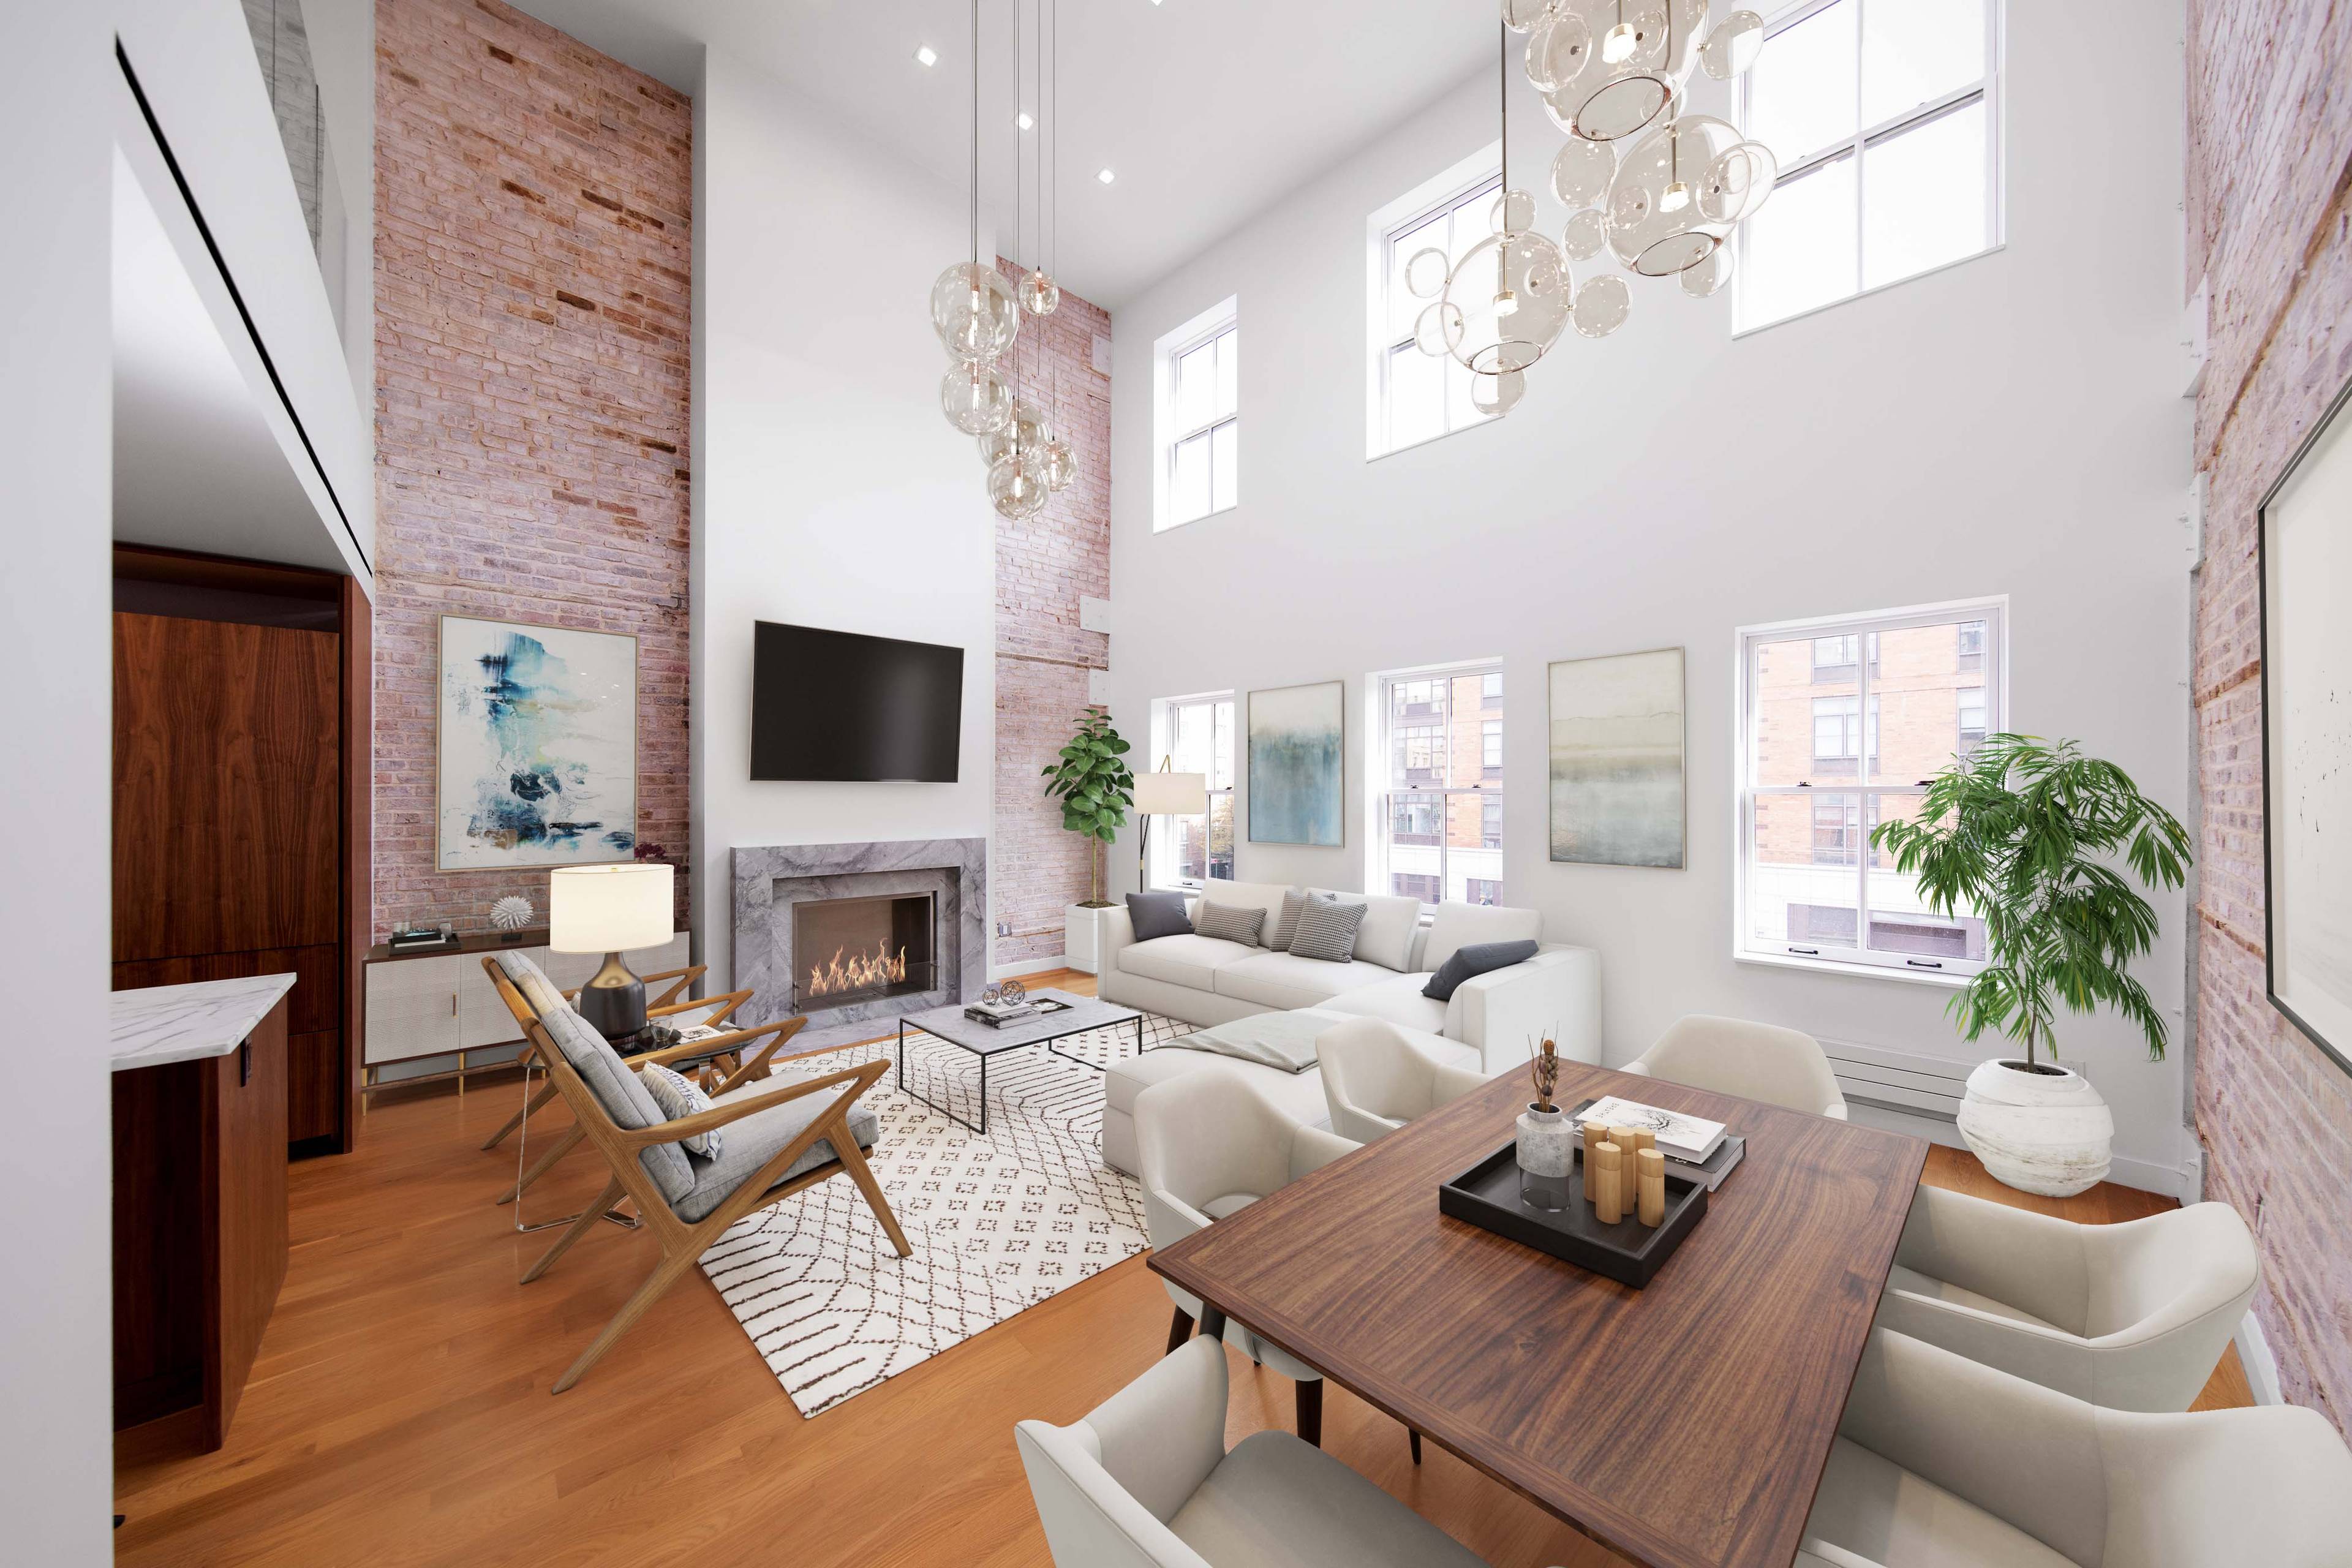 Immaculate gut renovated townhouse in Greenwich Village